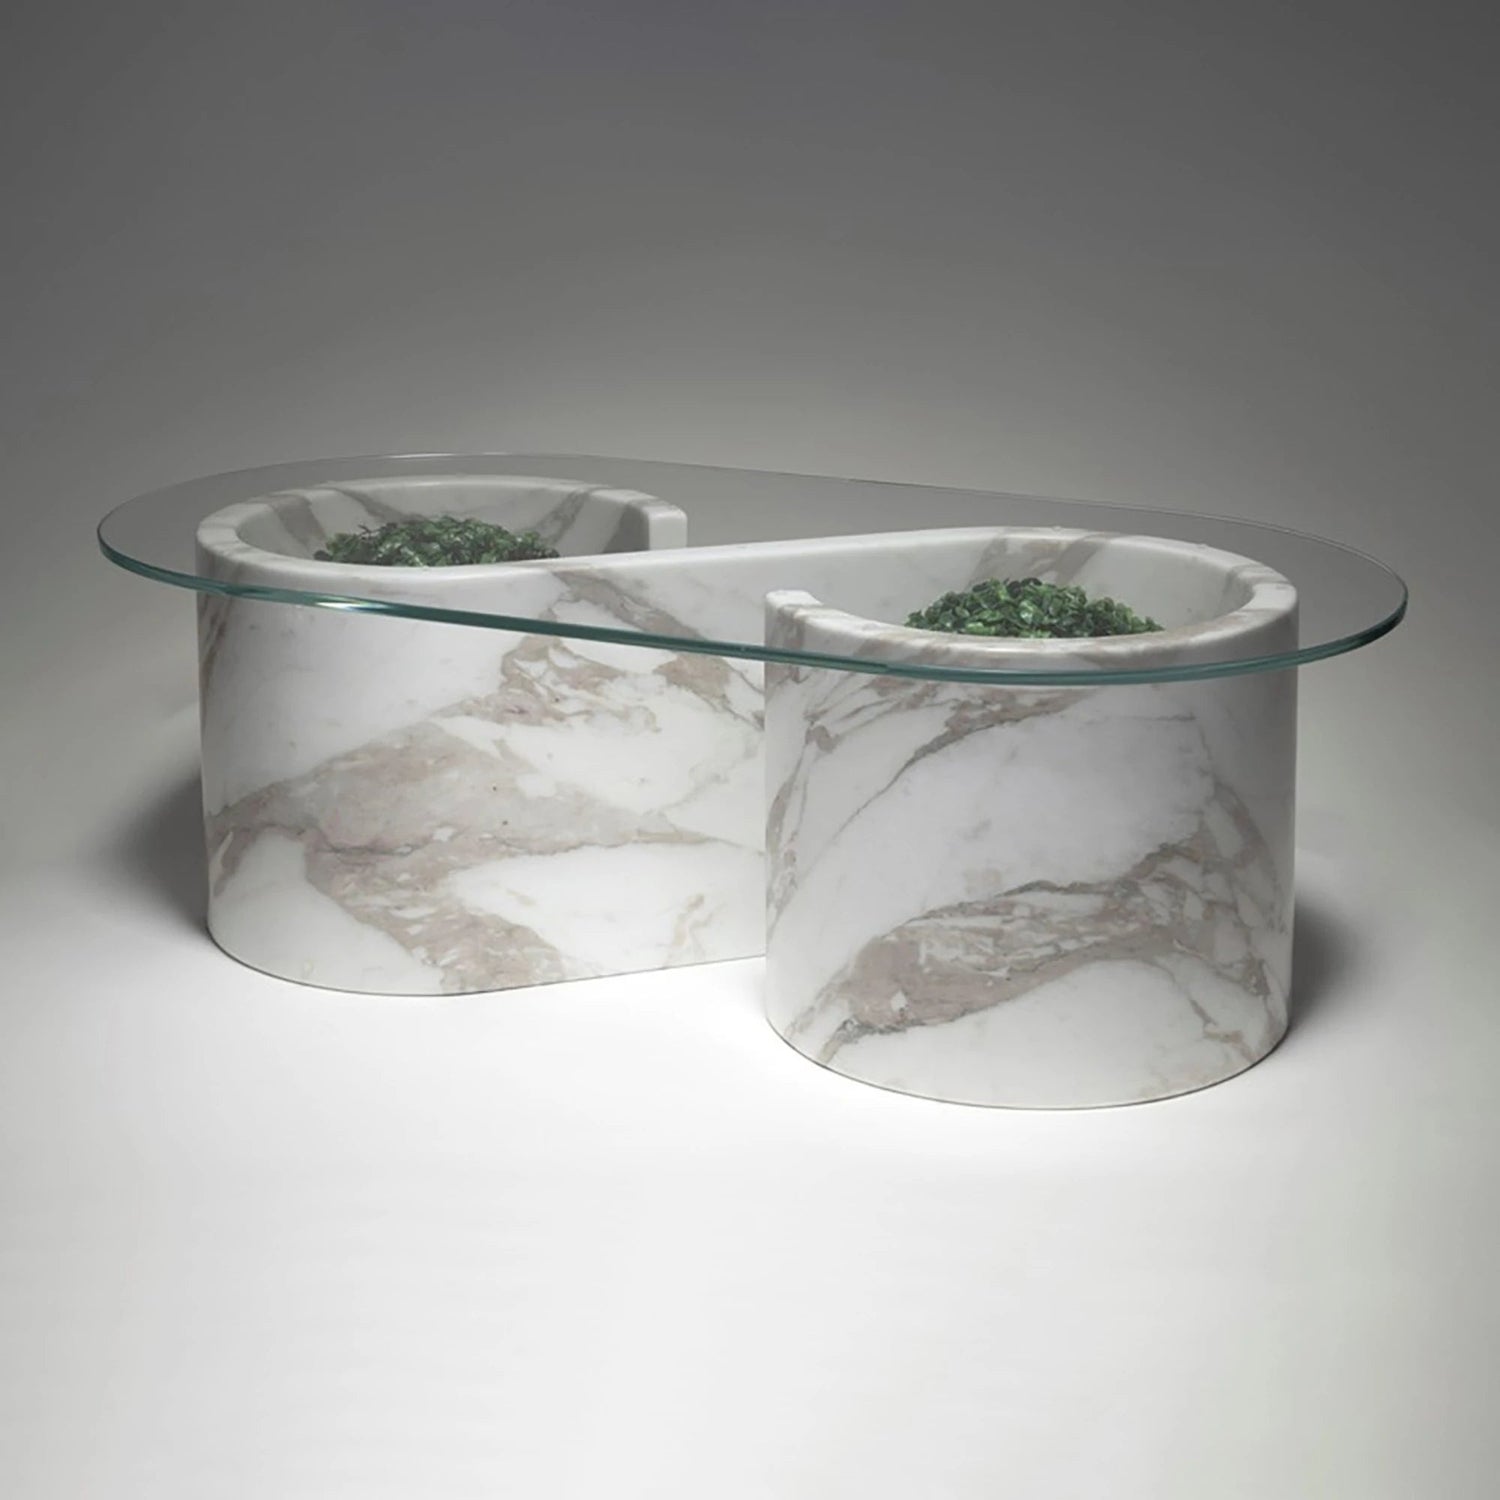 Serenity Coffee Table in Calacatta Marble - Elsa Home And Beauty